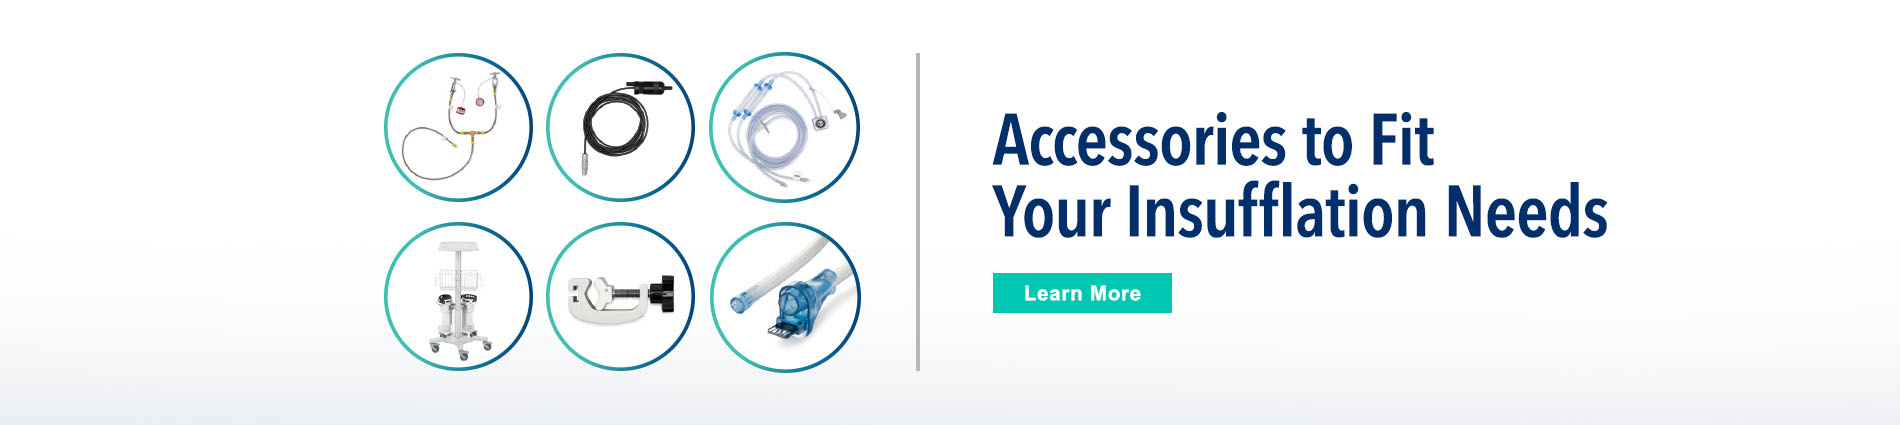 Accessories to fit your insufflation needs